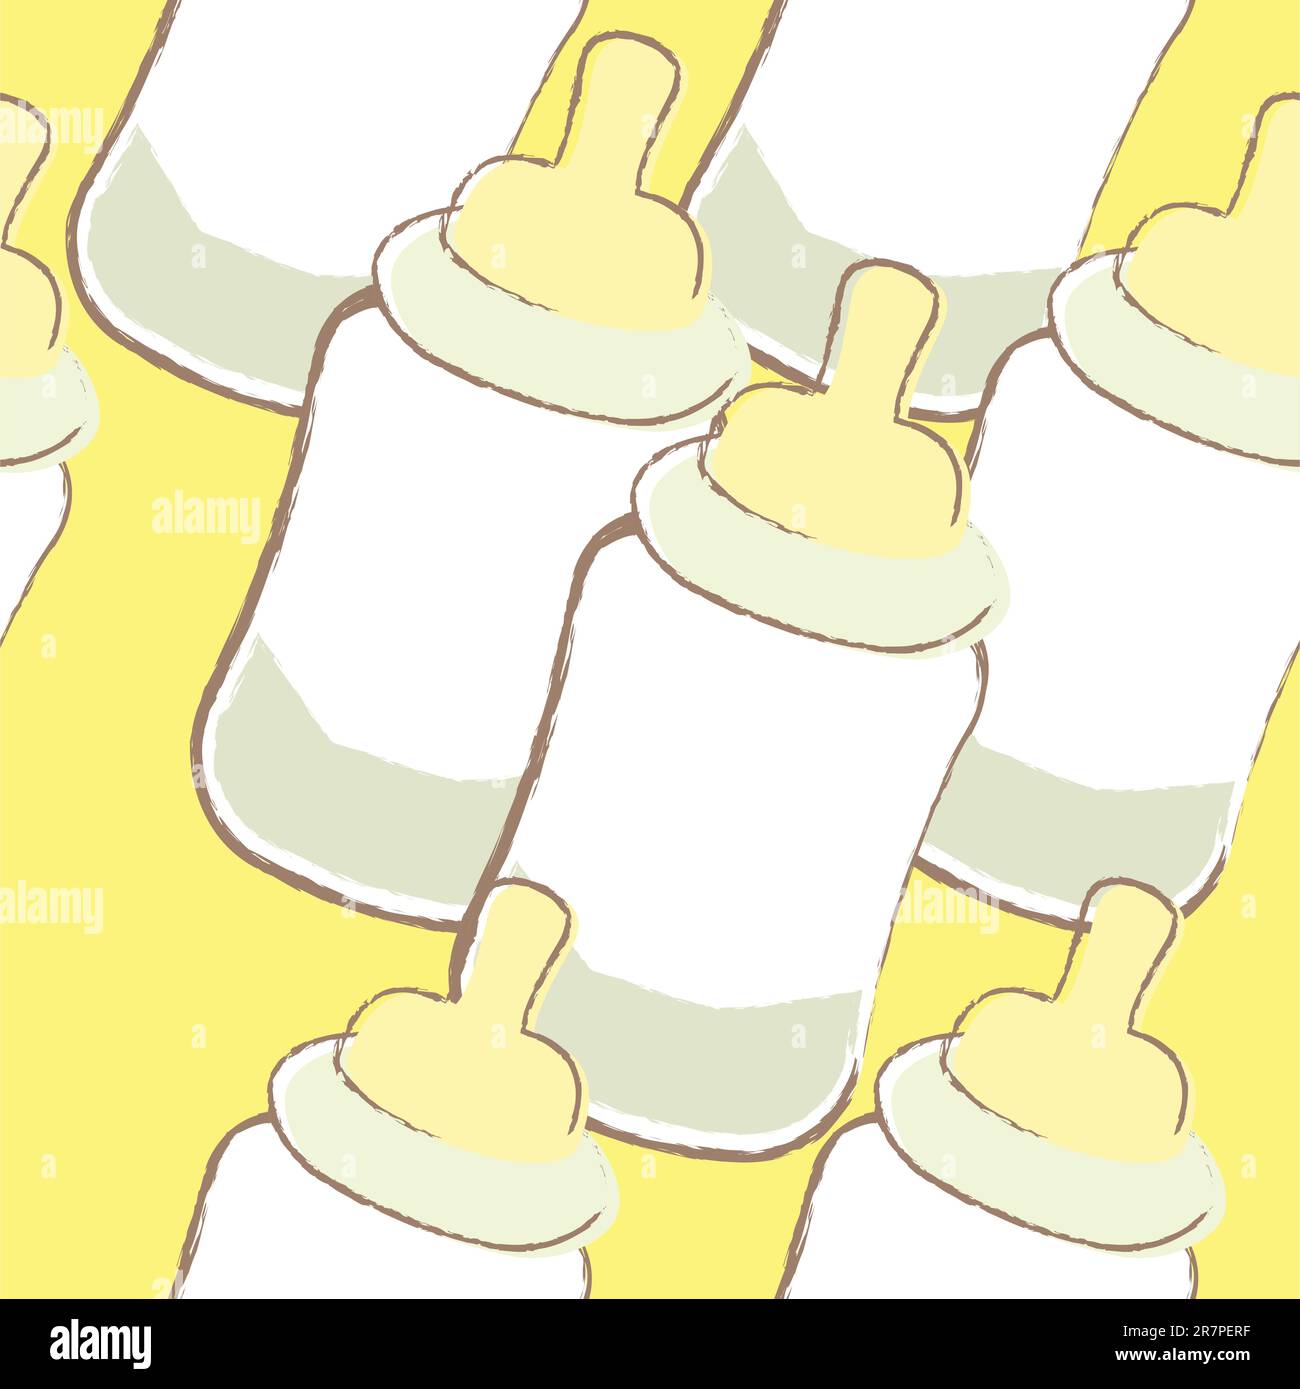 A seamless pattern of baby bottles in yellow. Stock Vector